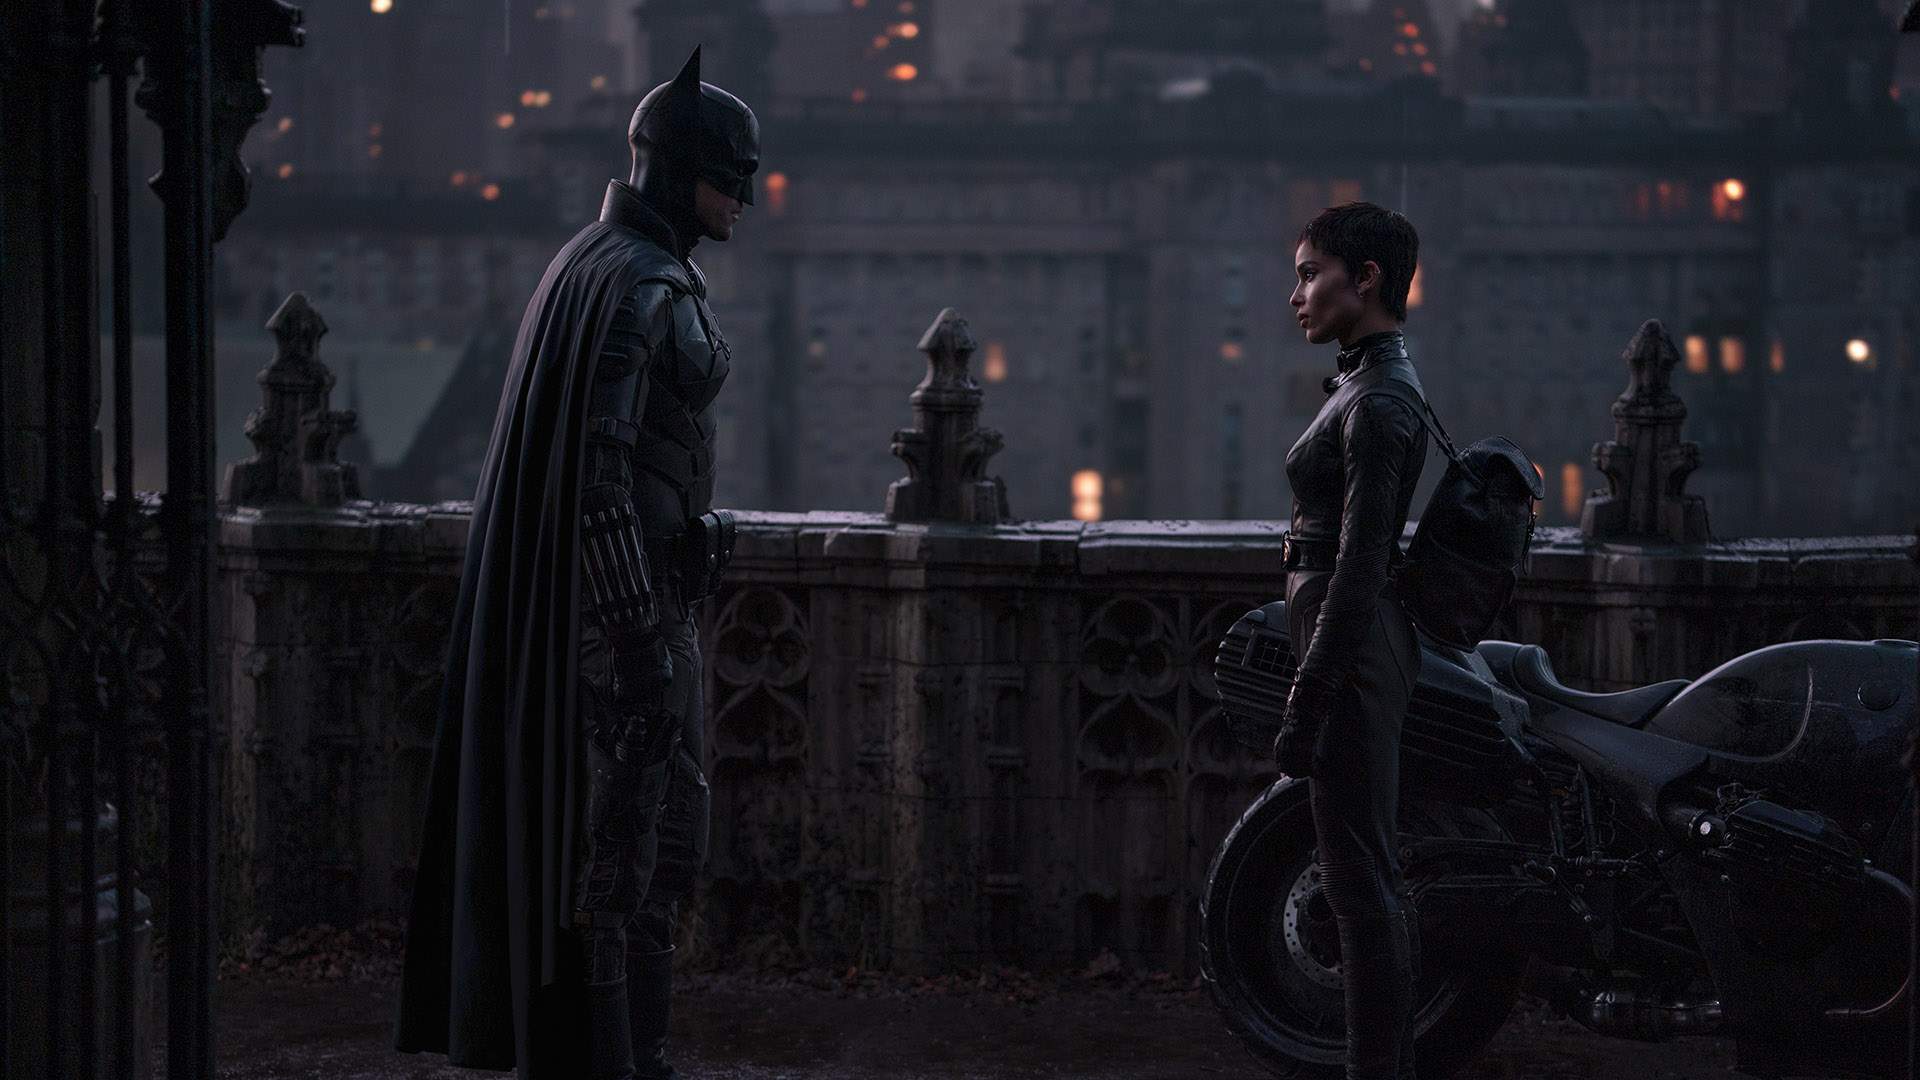 'The Batman' Is the Latest Blockbuster That's Been Fast-Tracked to Digital While Still in Cinemas